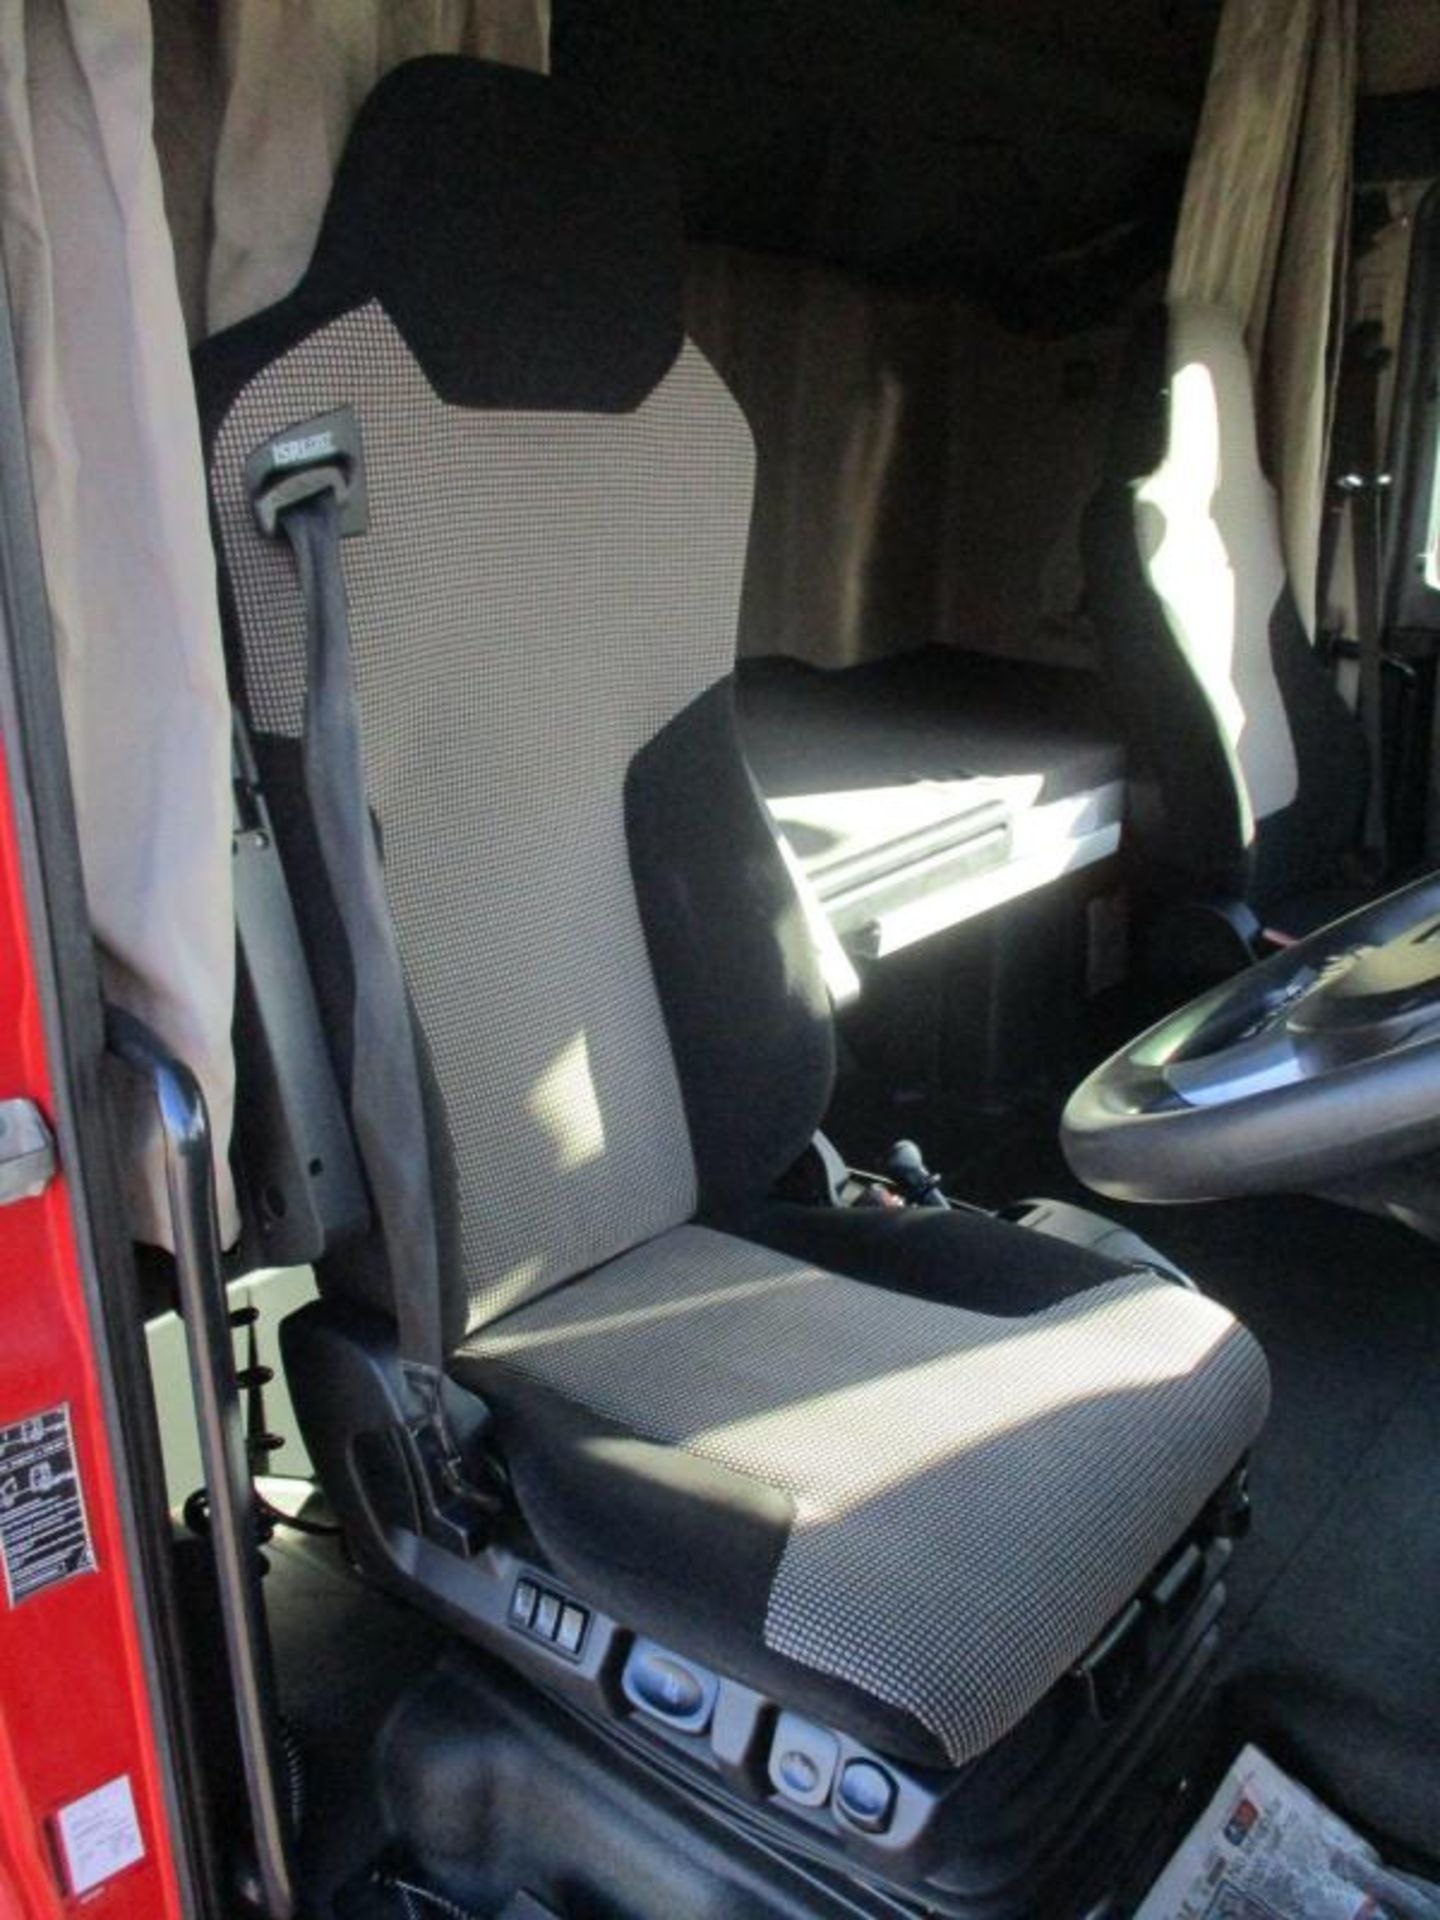 CLIMATE-CONTROLLED CABIN: MAN TGX 460 XXL WITH AIR CON AND HEATED SEAT - Image 12 of 23